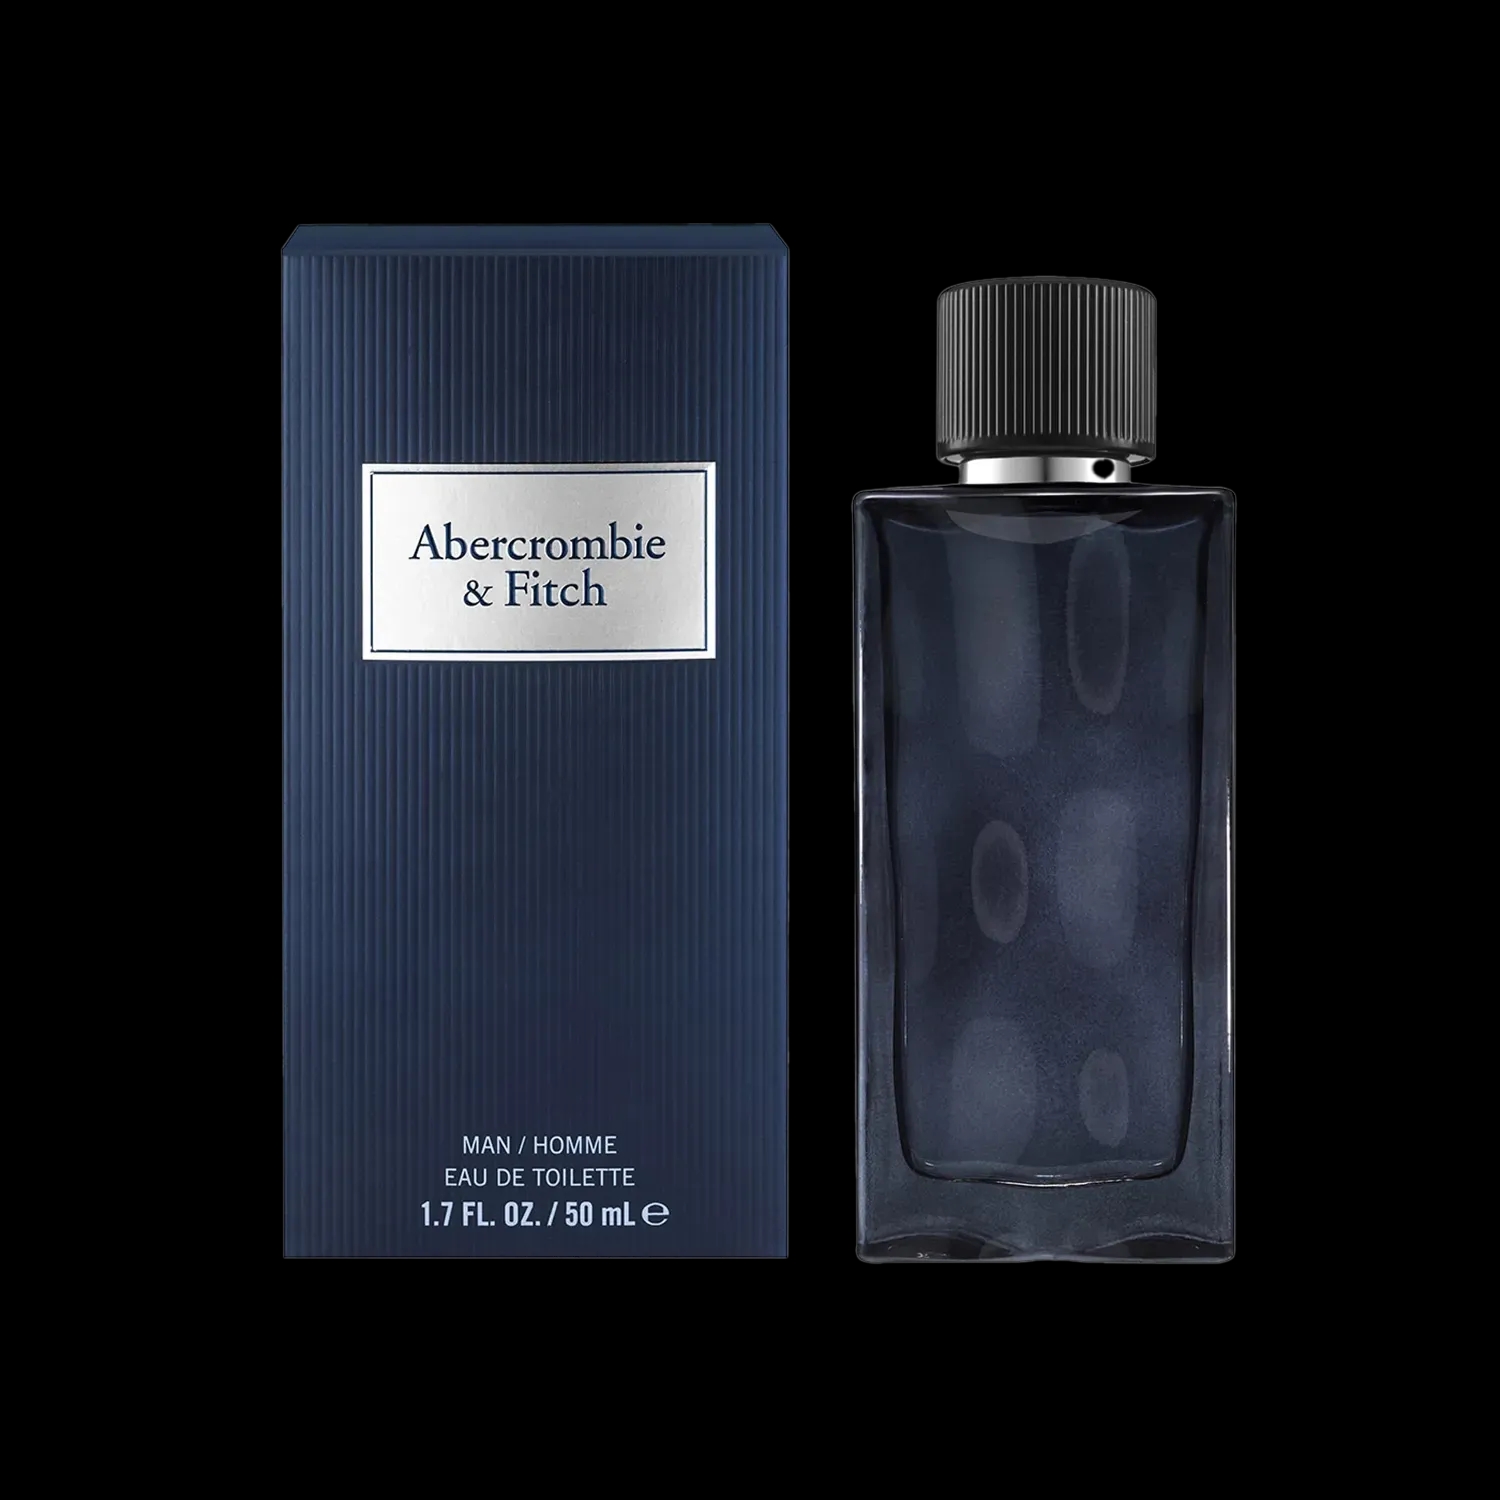 First Instinct Abercrombie & Fitch Edt- Perfume Mascul. 30ml